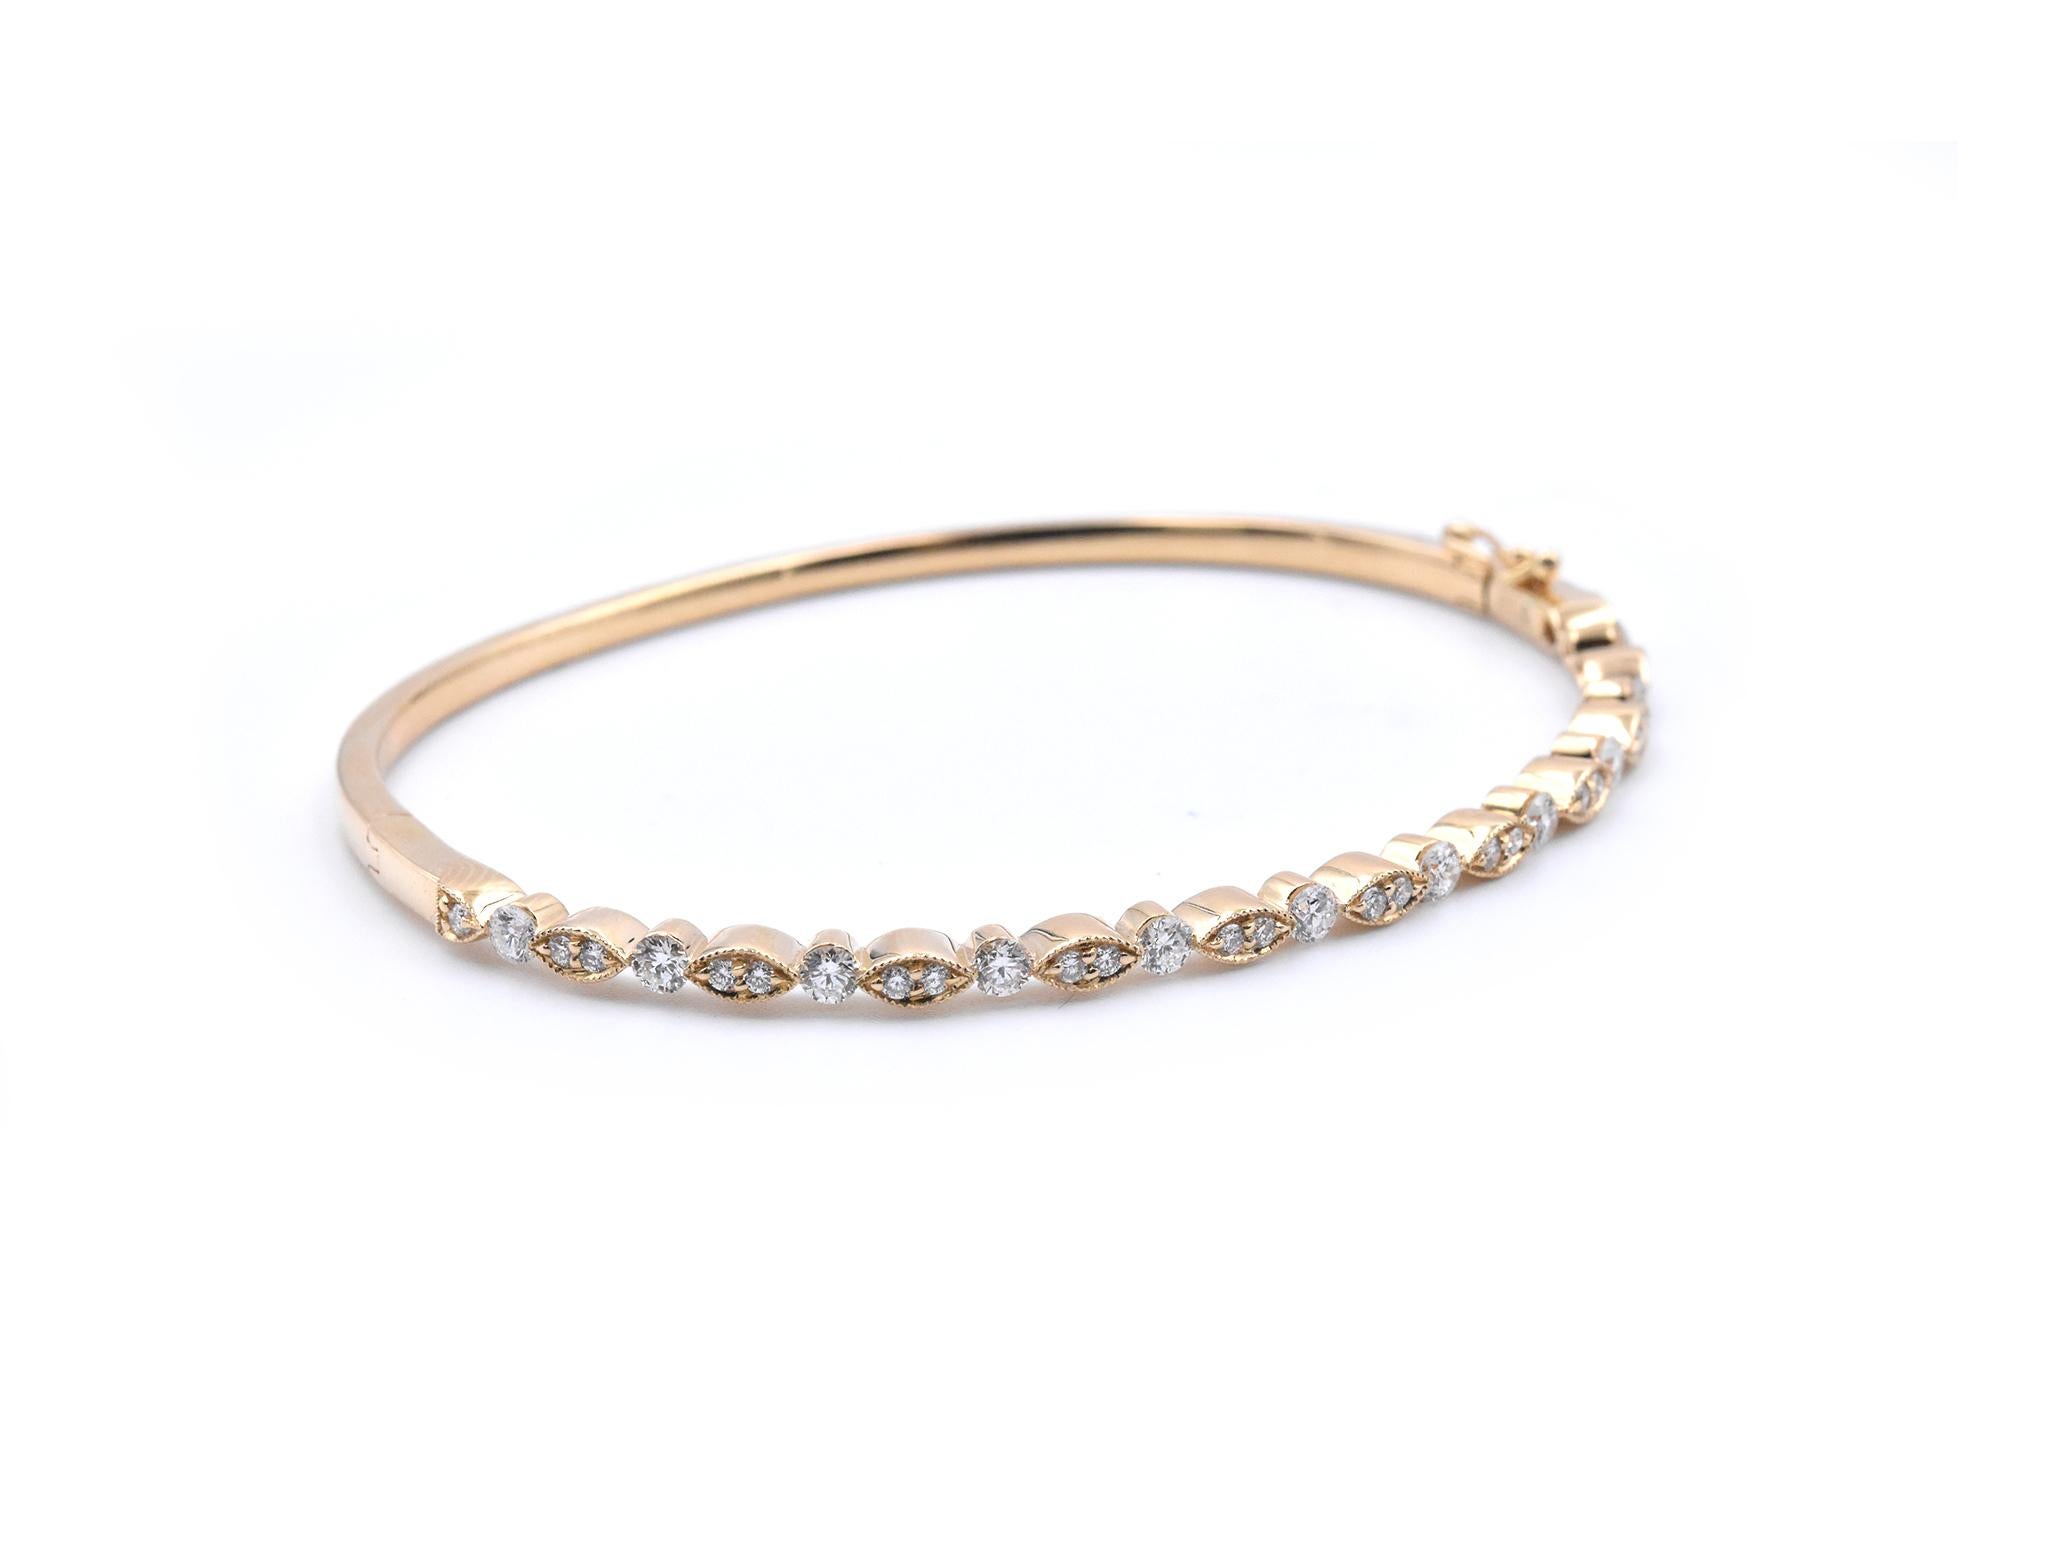 Material: 18k yellow gold
Diamonds: 34 round brilliant cuts = 1.12cttw
Color: G
Clarity: VS
Dimensions: bracelet will fit a 7-inch wrist
Weight: 12.40 grams 
